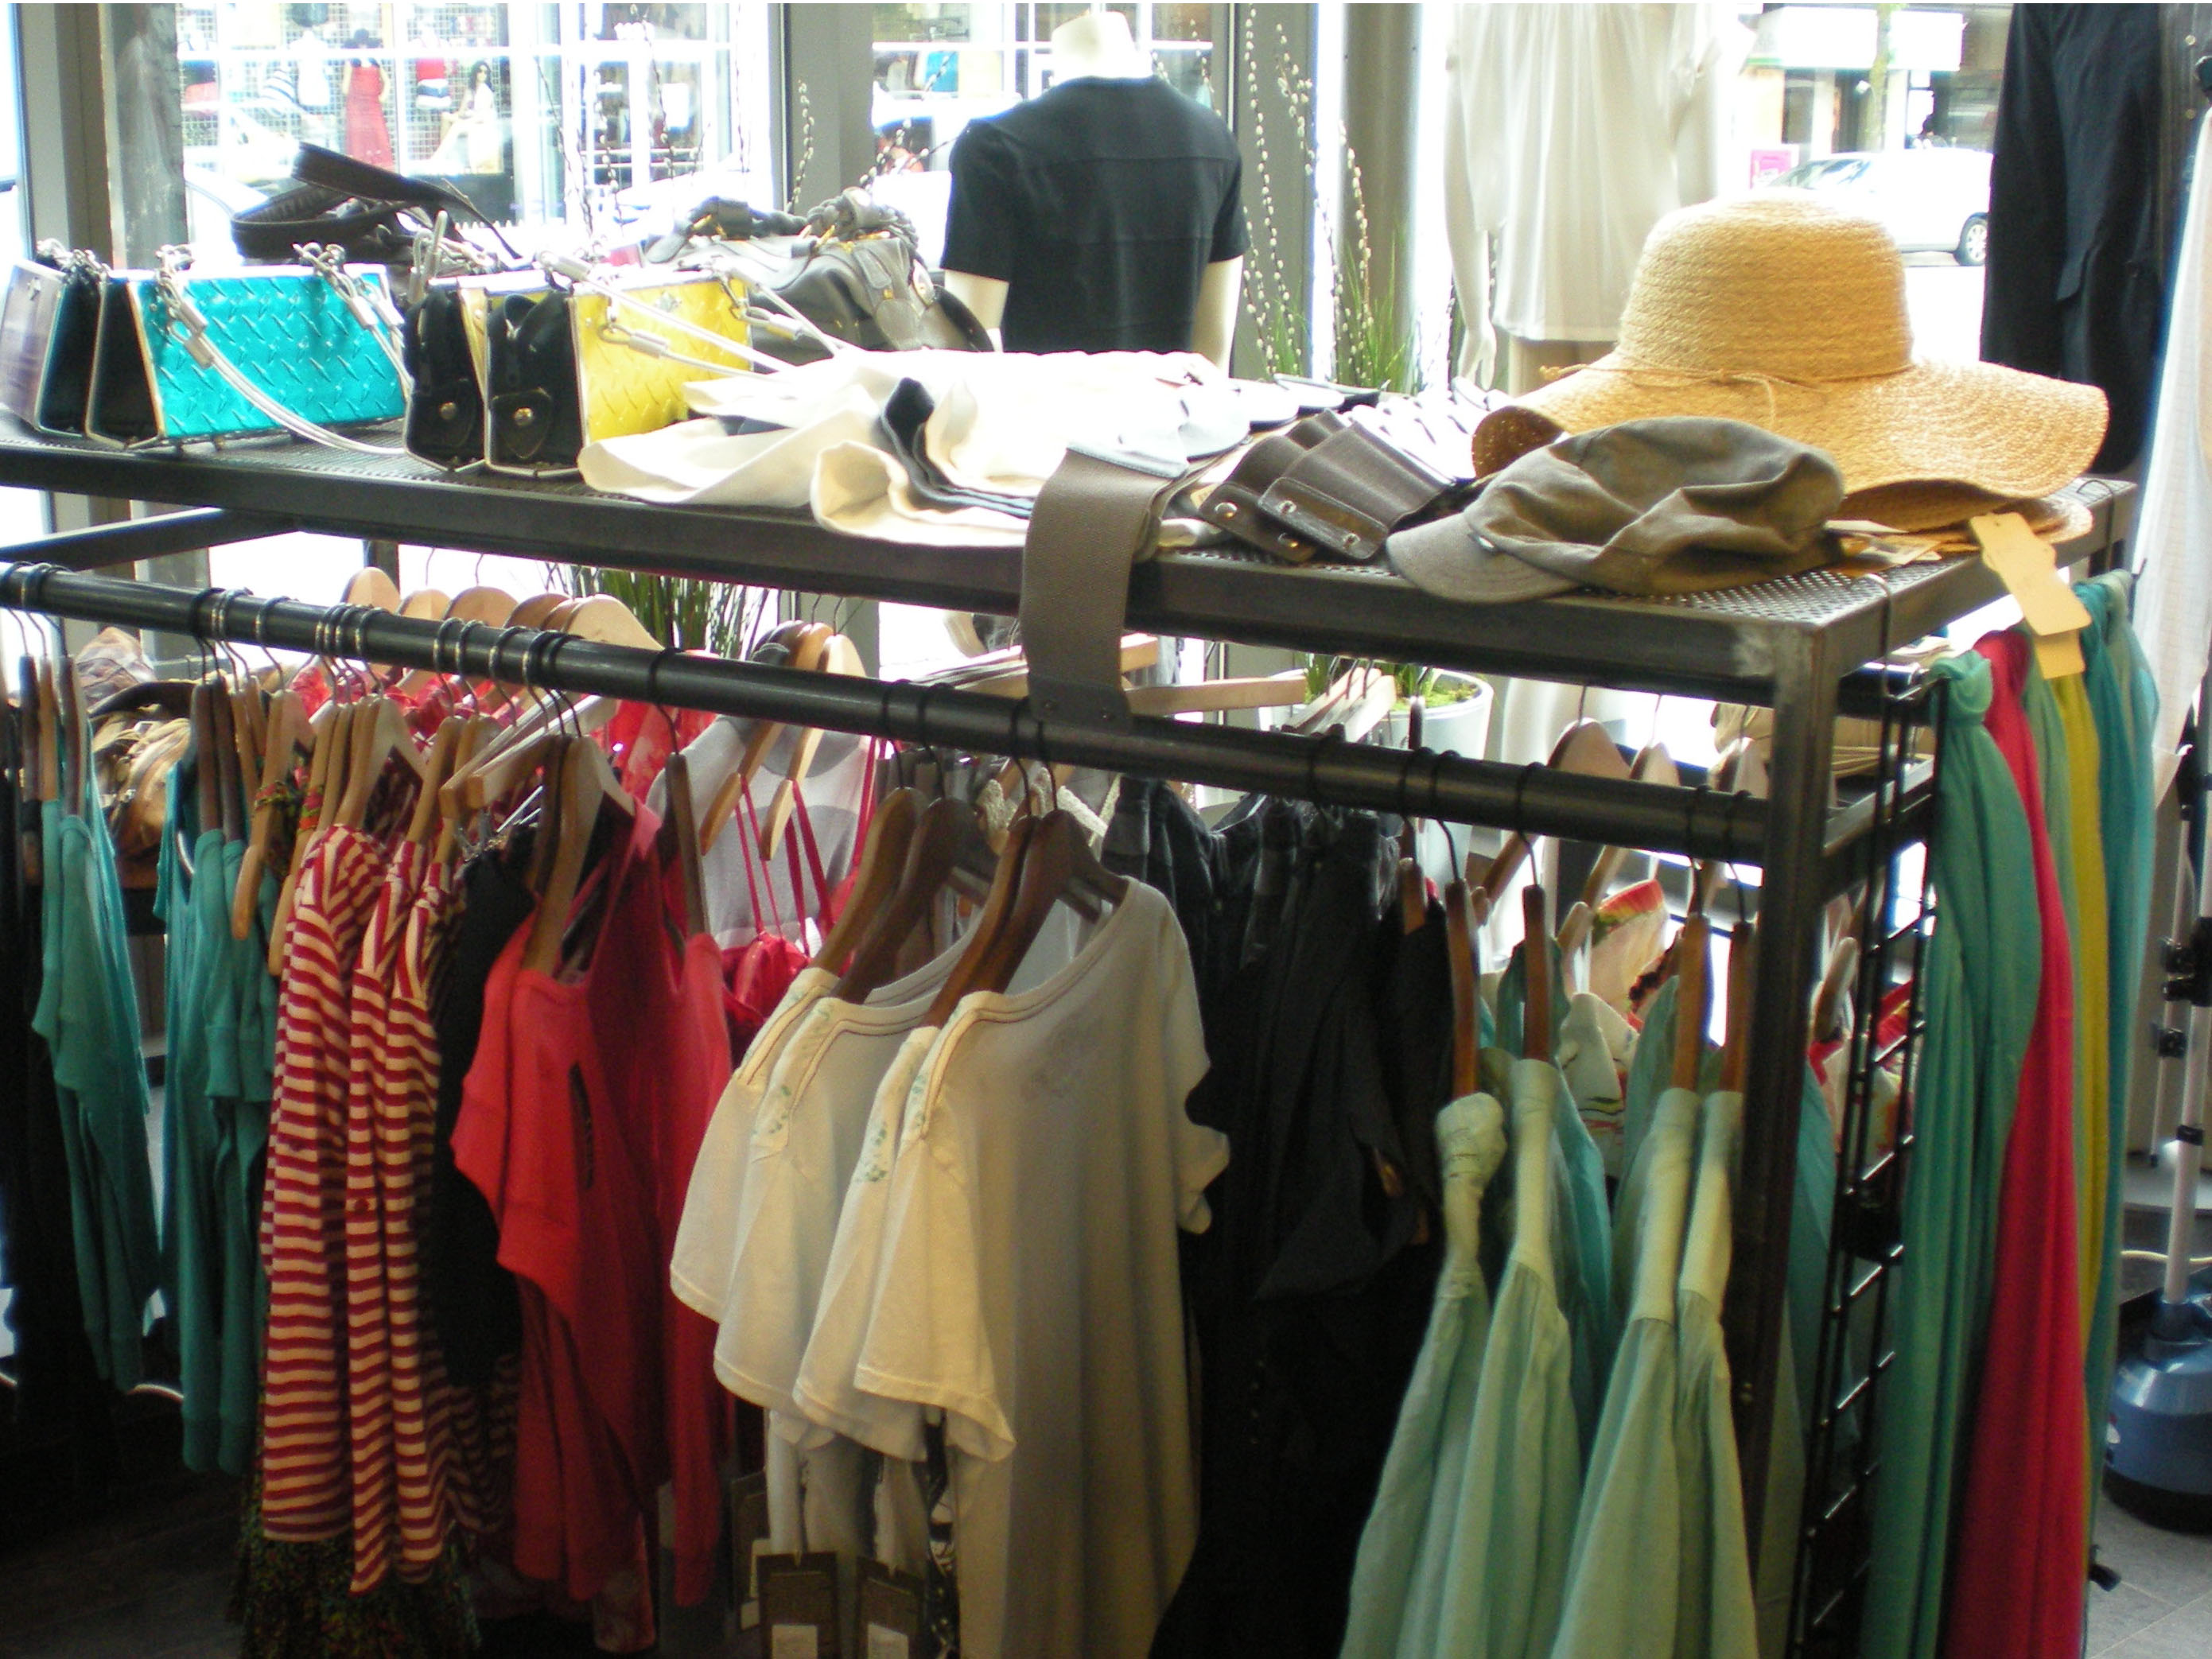 Clothes on the racks at Atmosfere